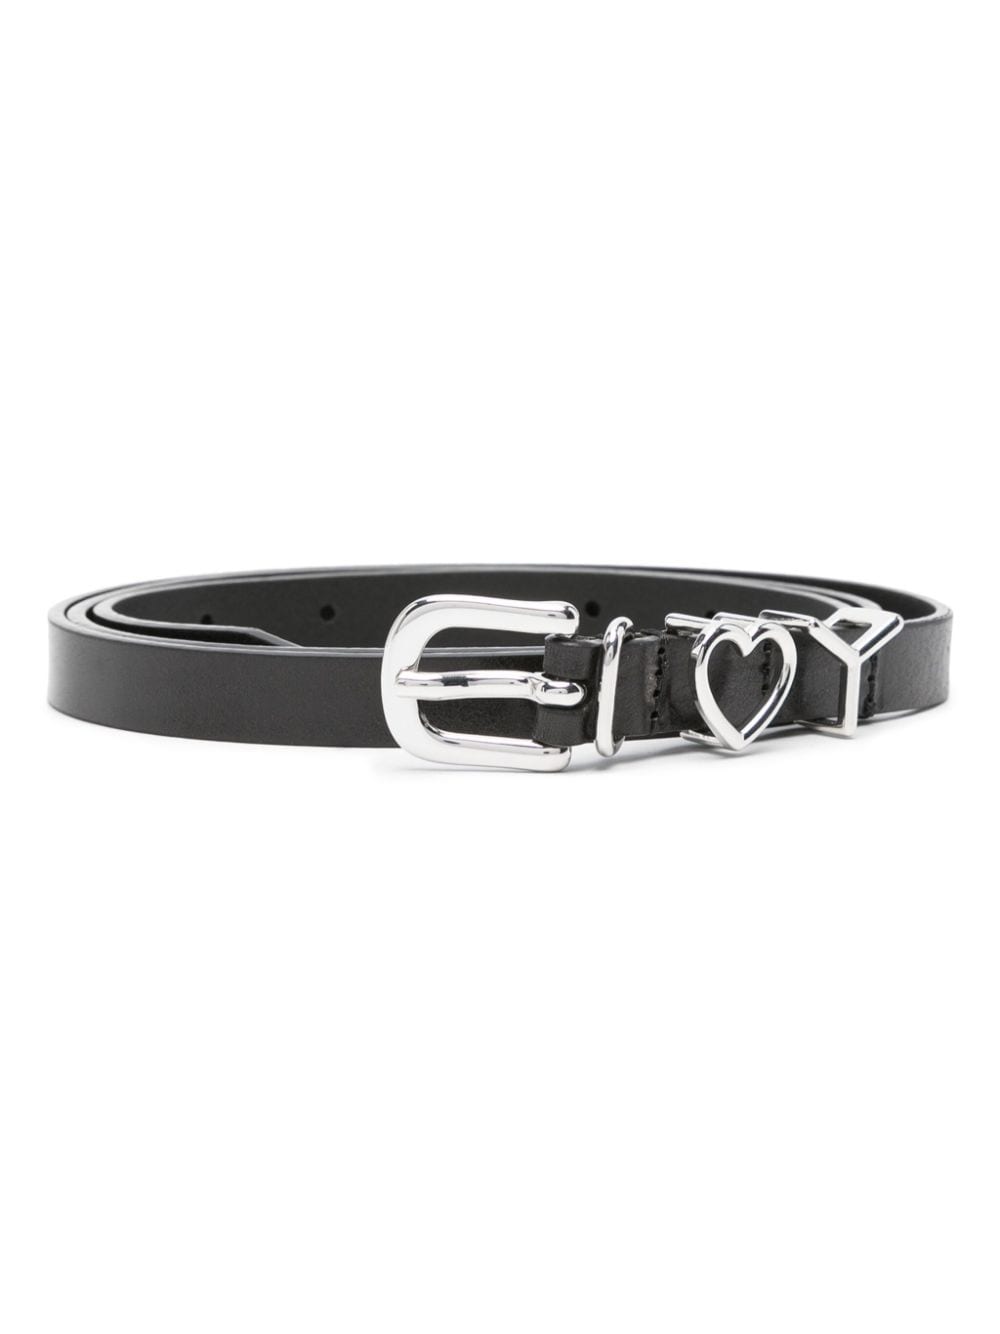 Y/Project Y heart leather belt - Black von Y/Project